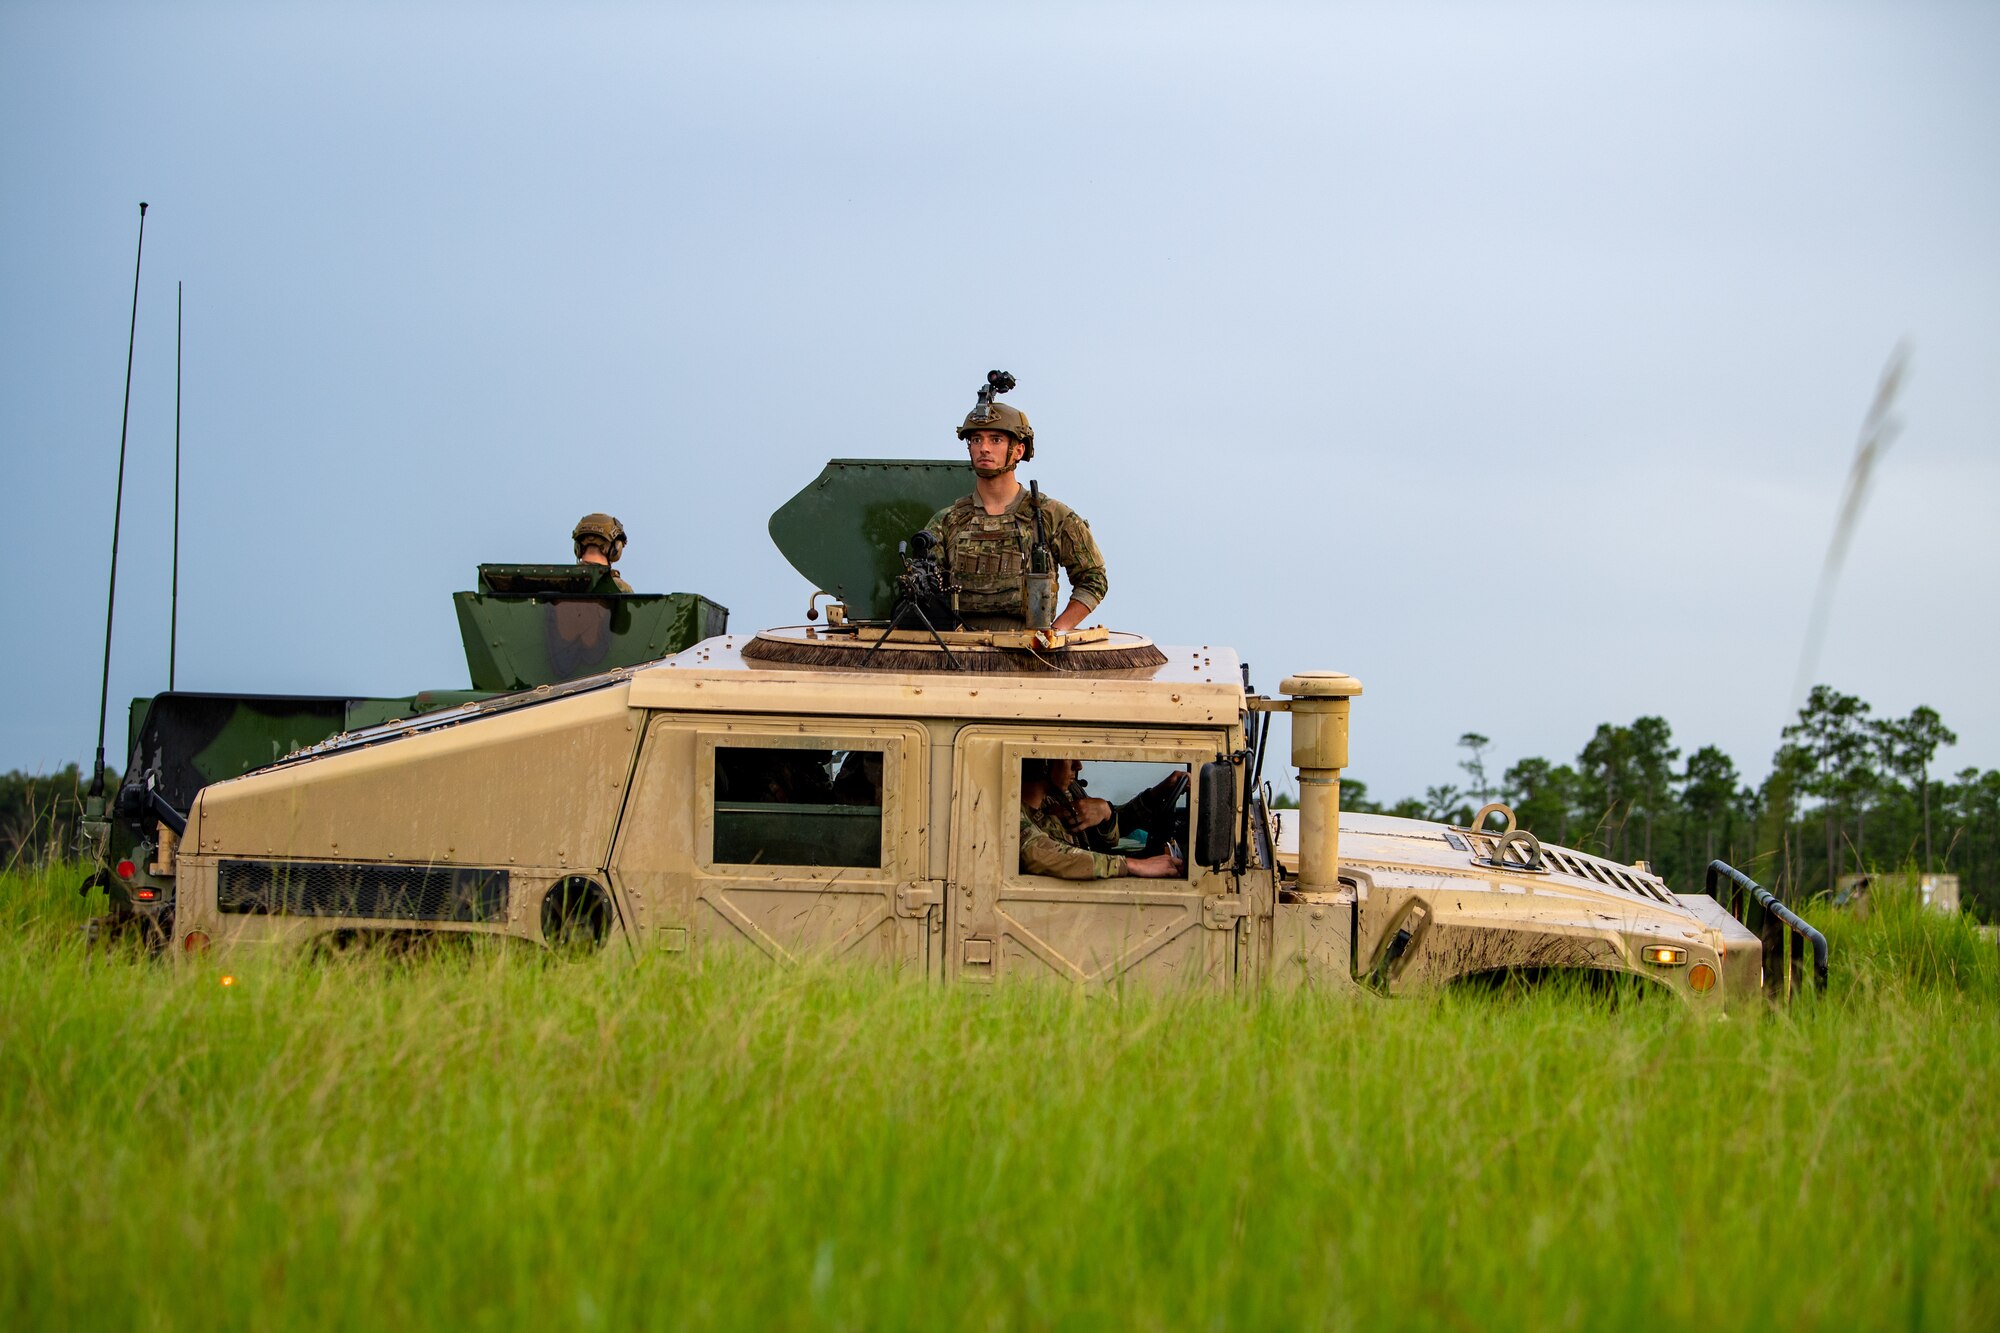 Photo of Airmen operating a Humvee